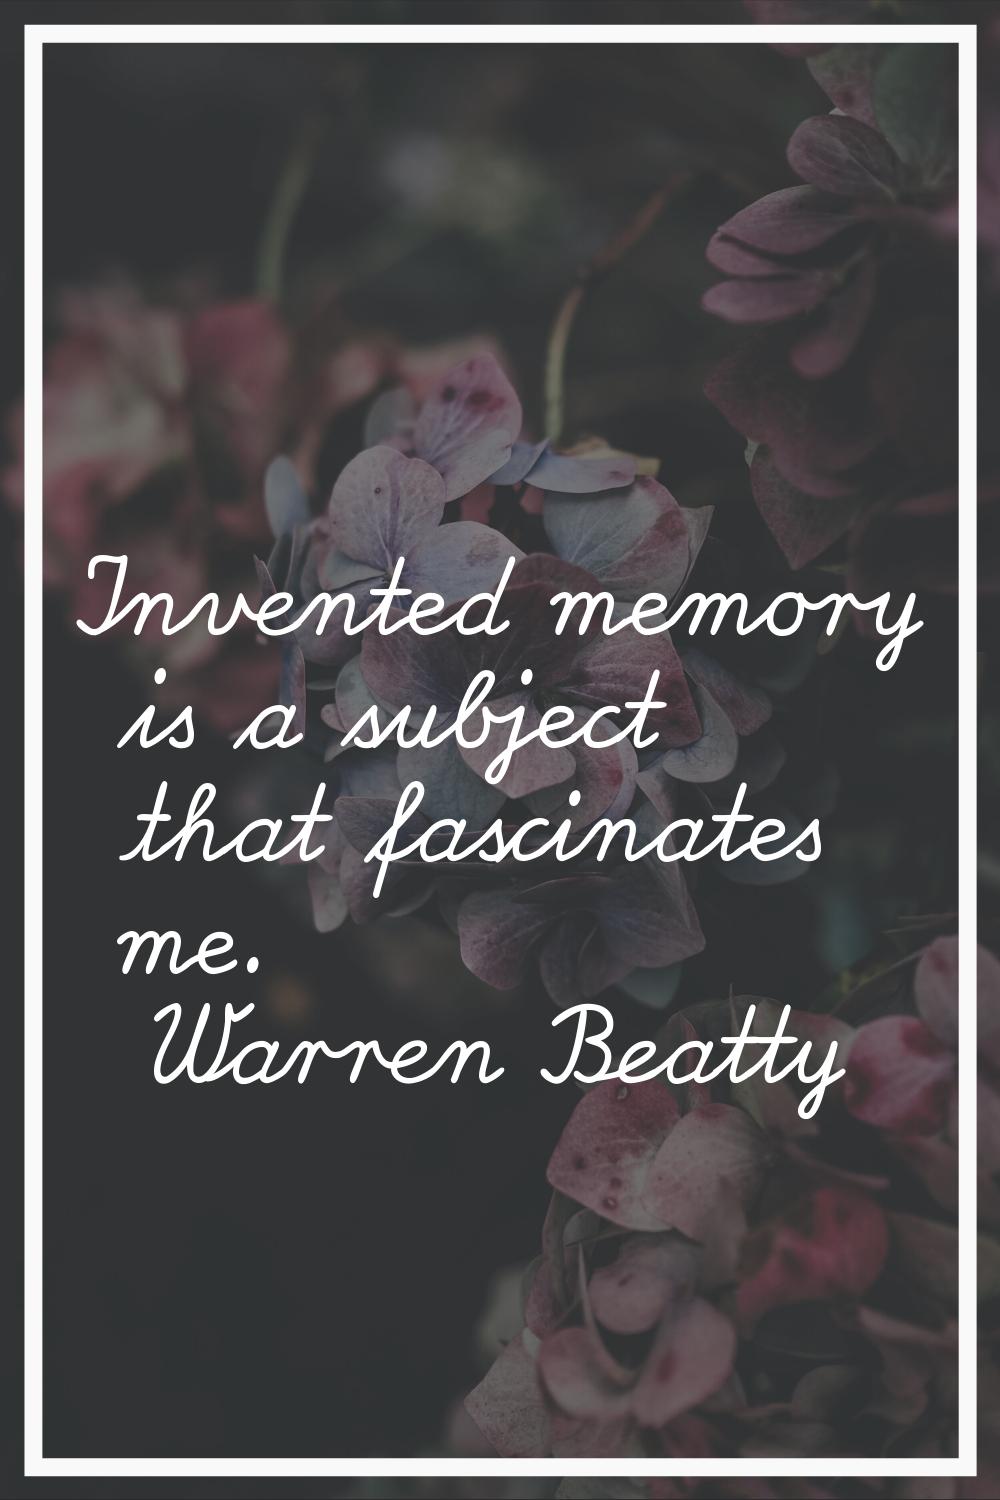 Invented memory is a subject that fascinates me.